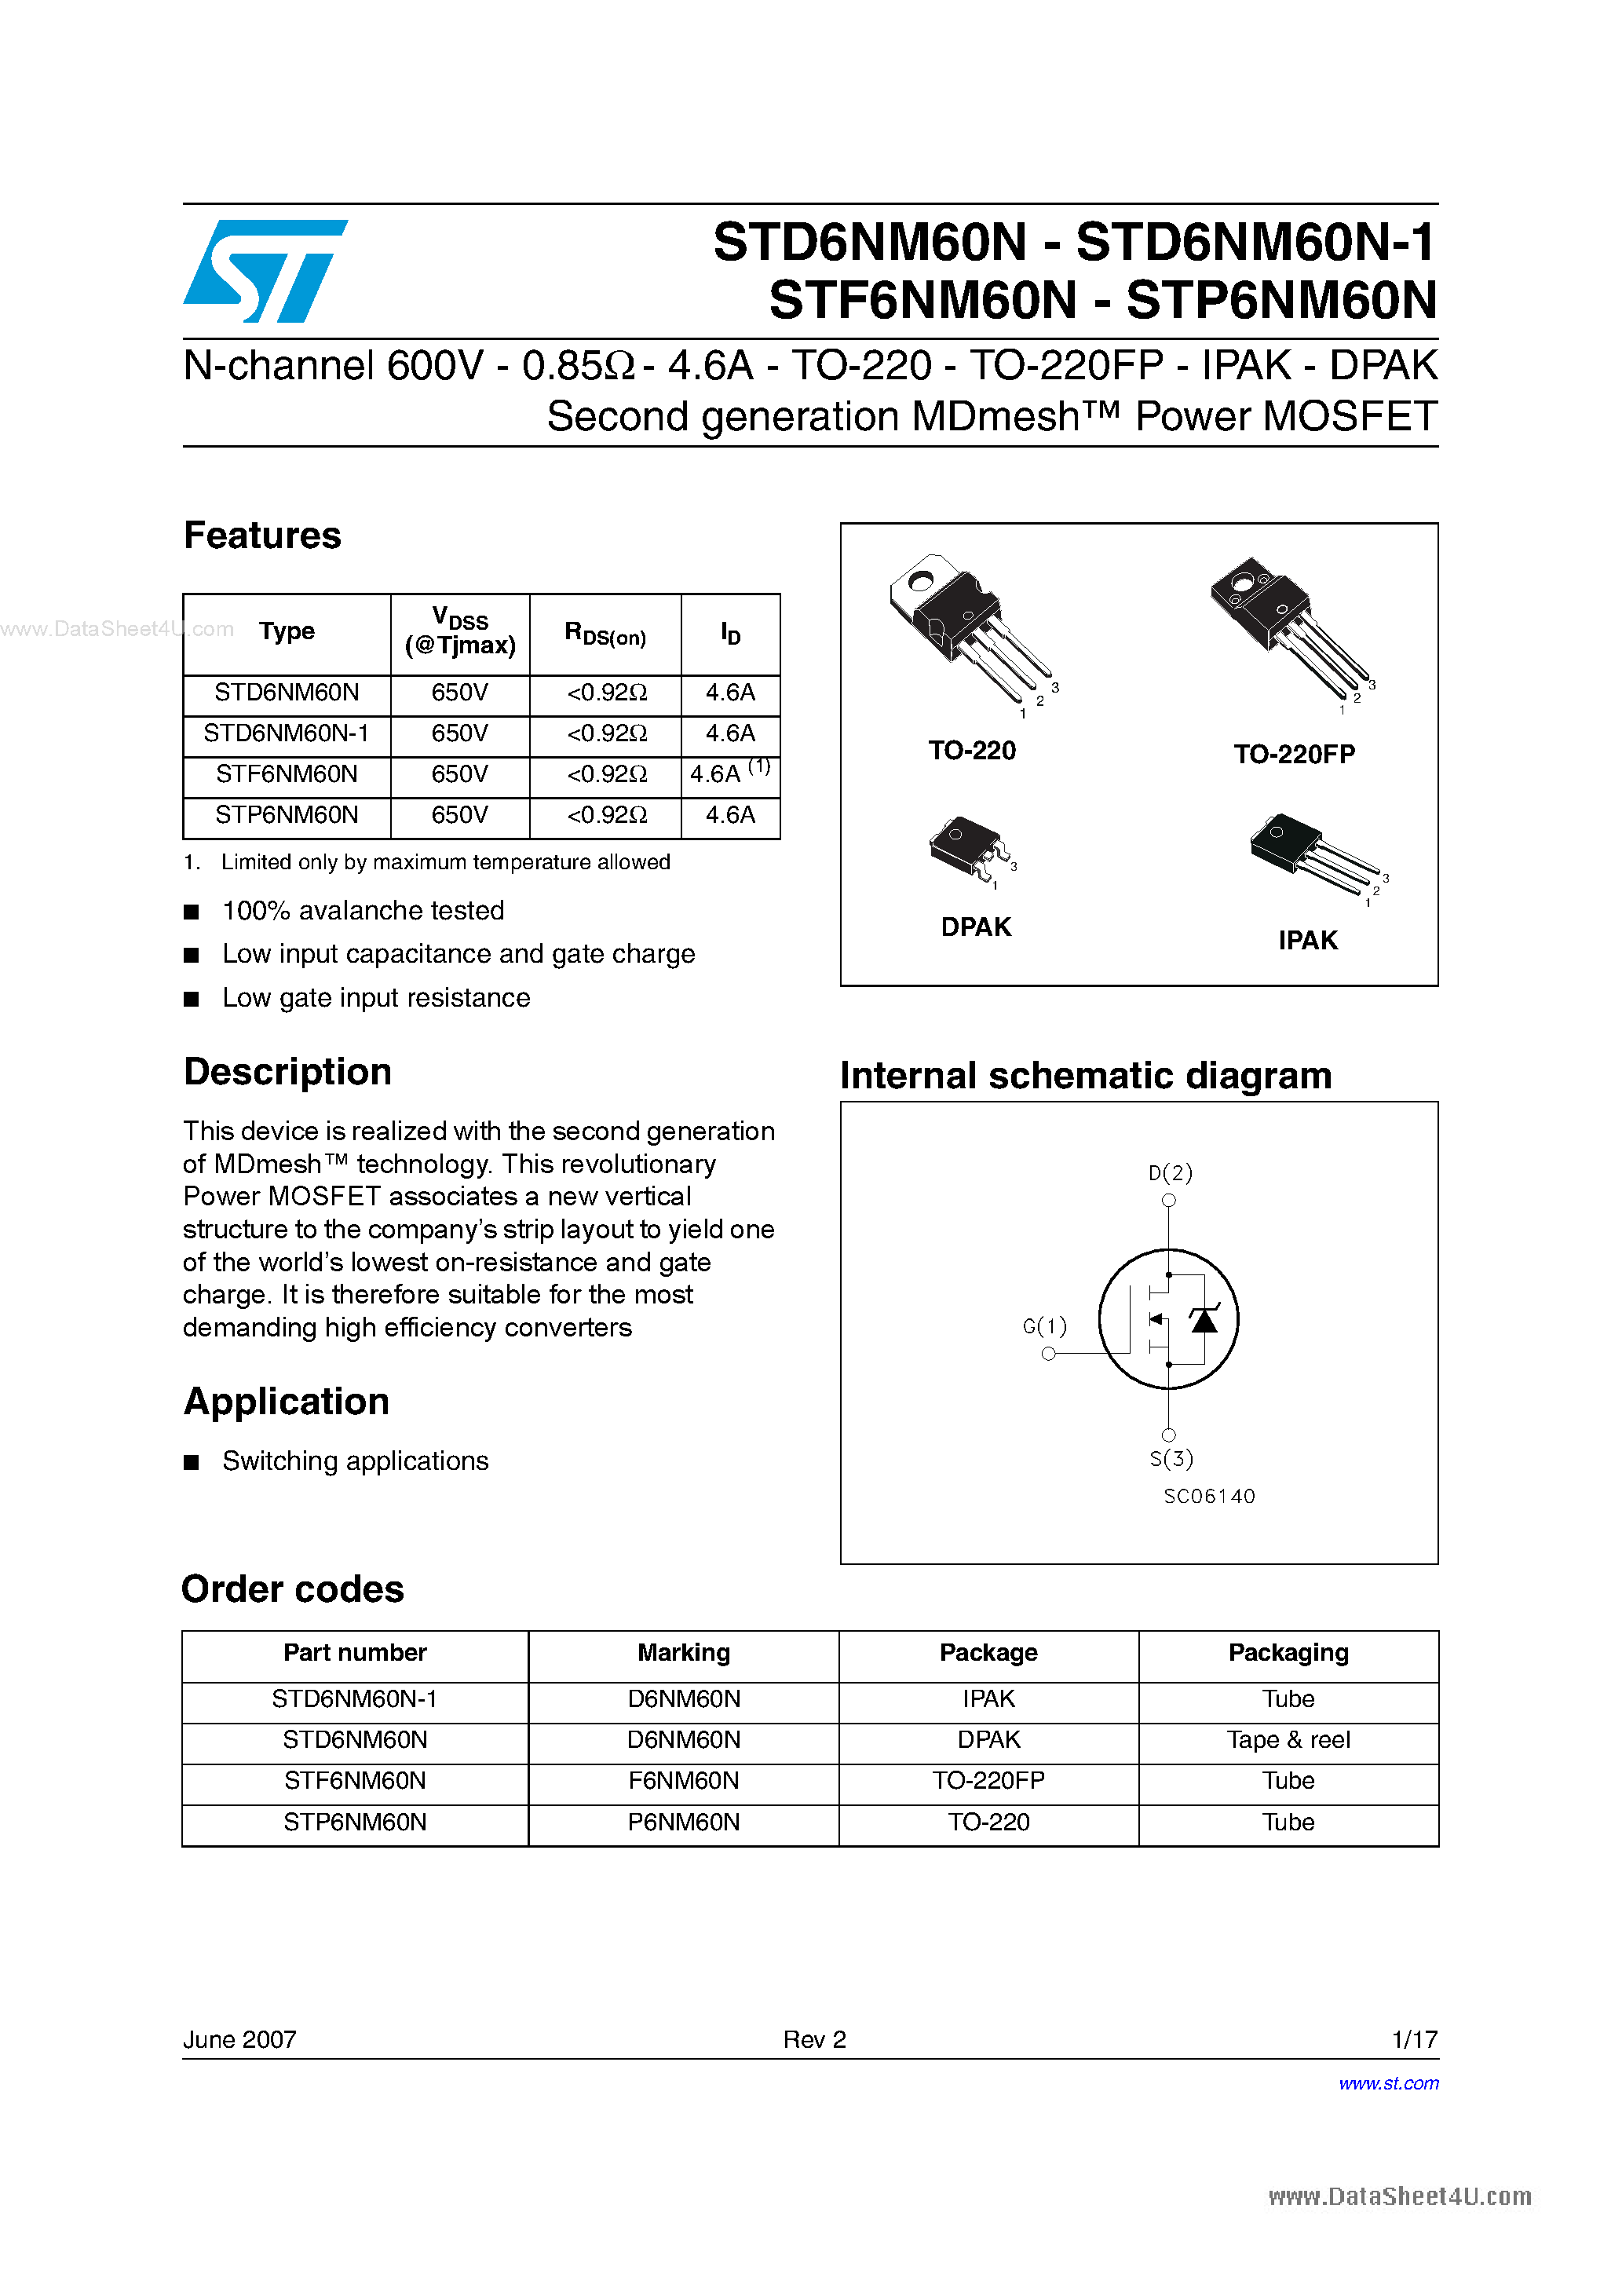 Datasheet STP6NM60N - N-channel Power MOSFET page 1